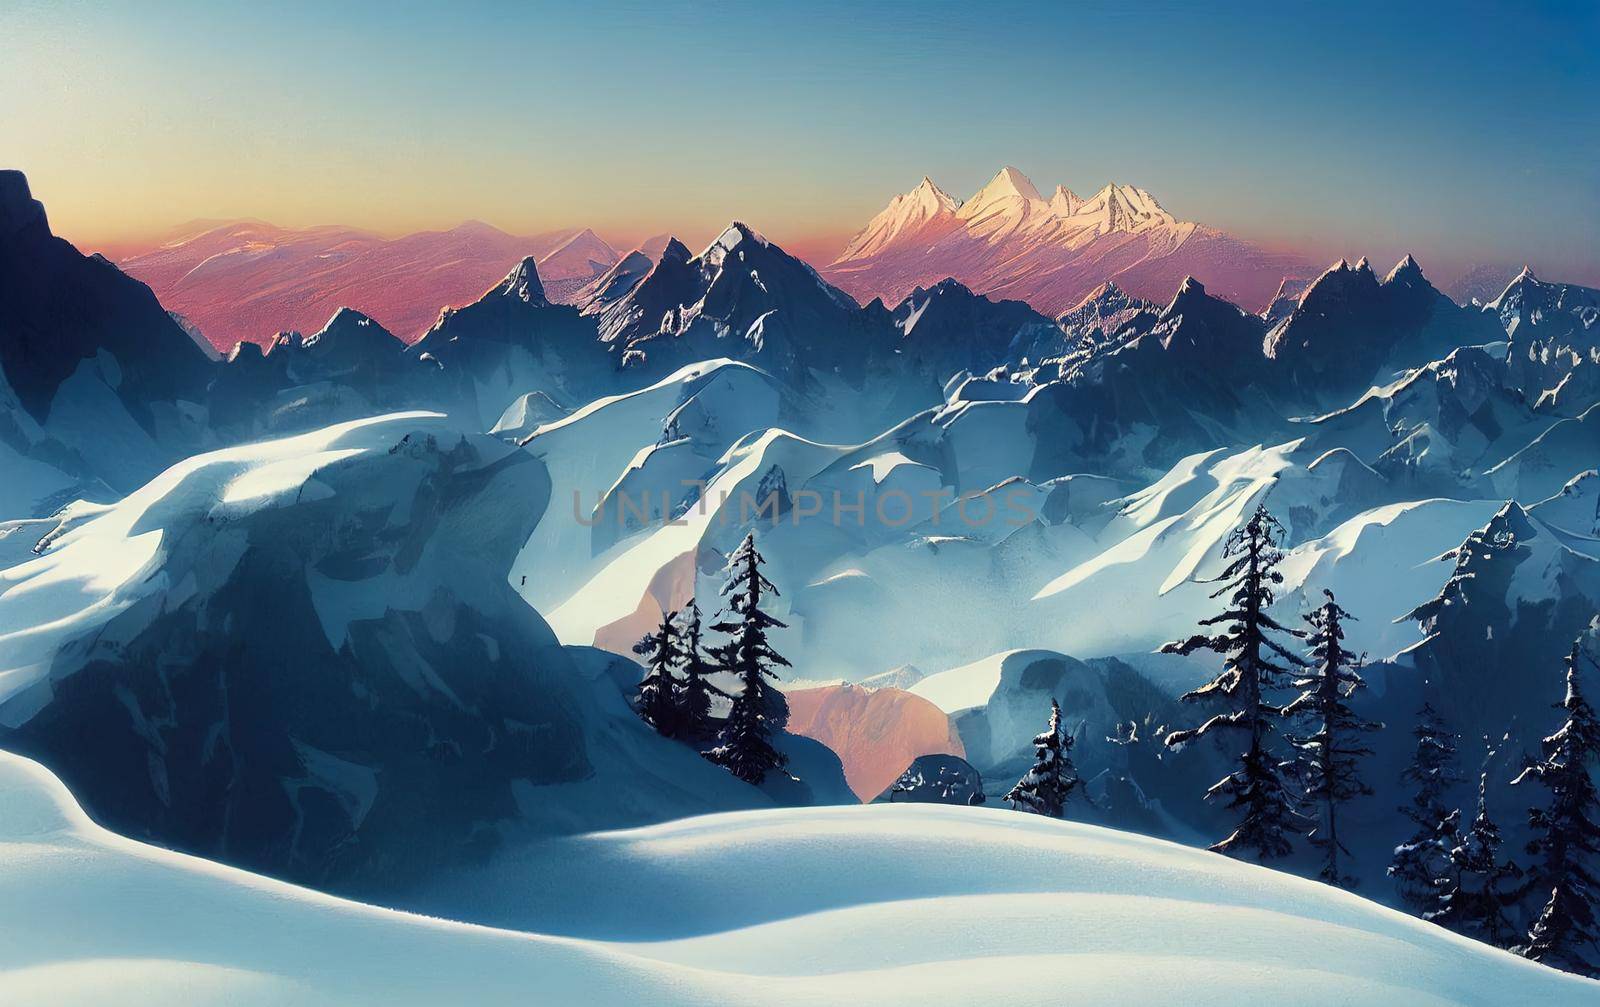 mountains, trees, tree in mountains, winter landscape, mountains in High quality 2d illustration. by 2ragon